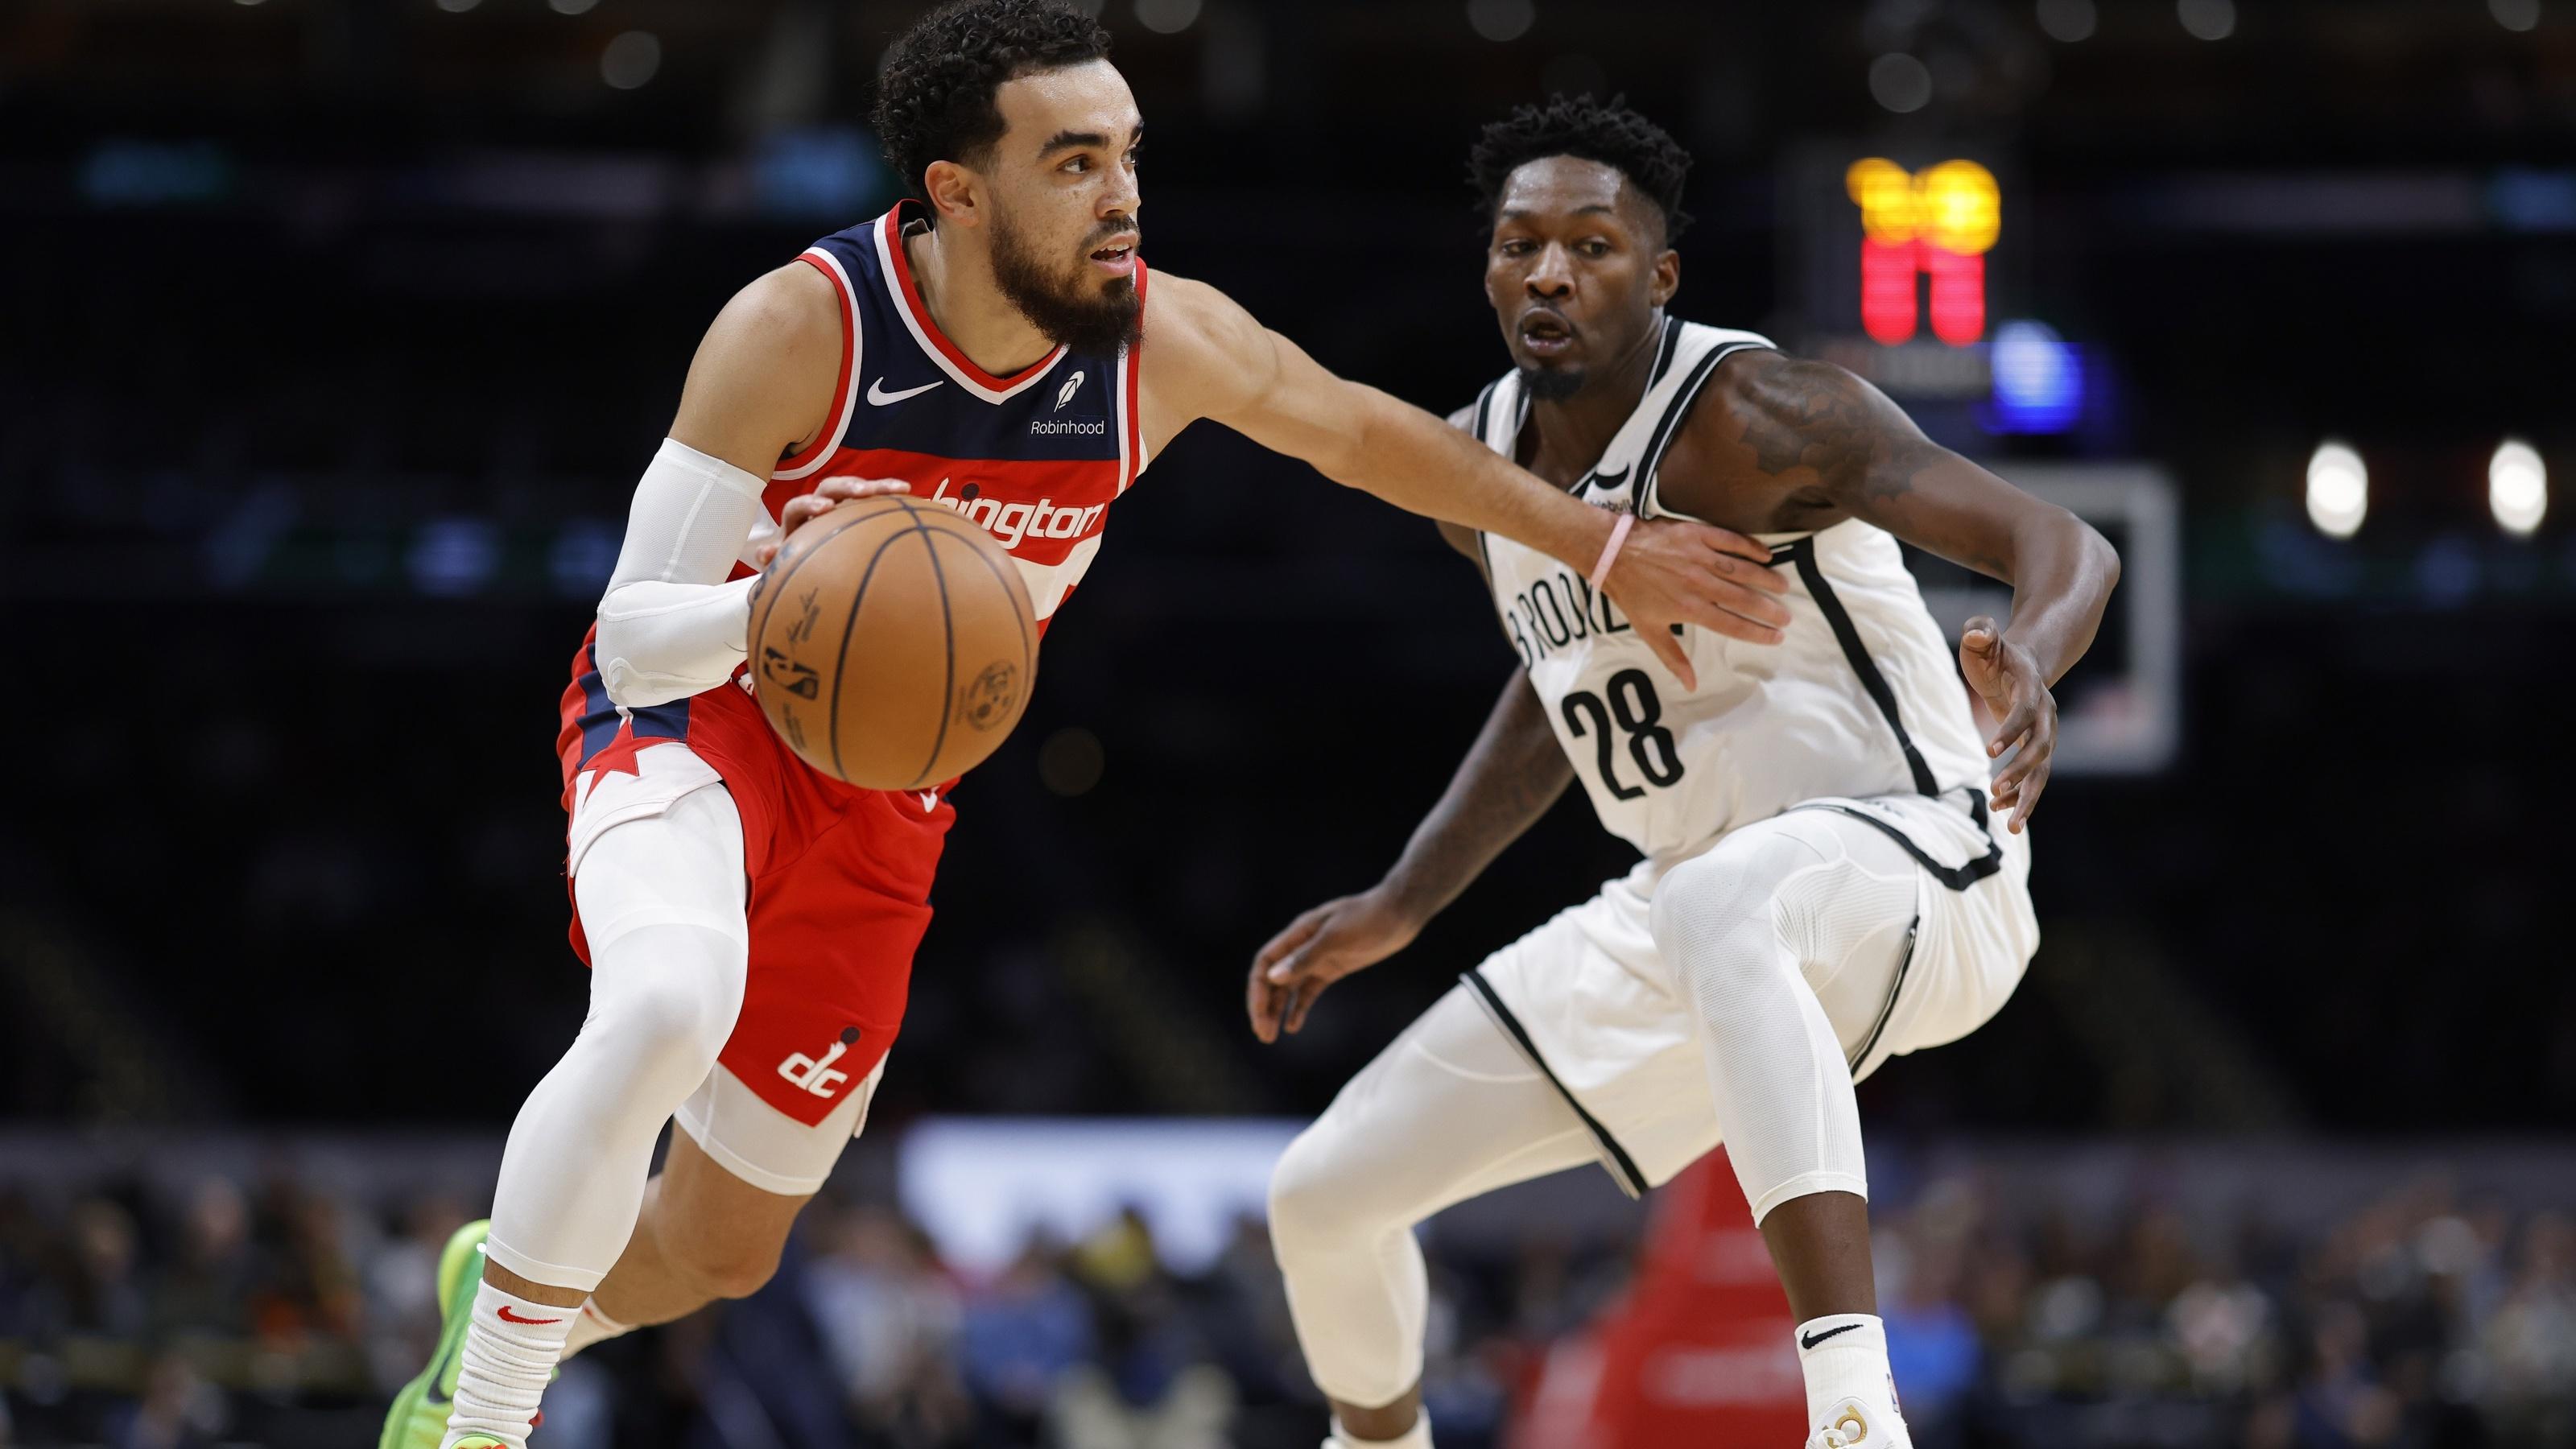 Washington Wizards guard Tyus Jones (5) drives to the basket as Brooklyn Nets forward Dorian Finney-Smith (28) defends in the first quarter at Capital One Arena. / Geoff Burke-USA TODAY Sports